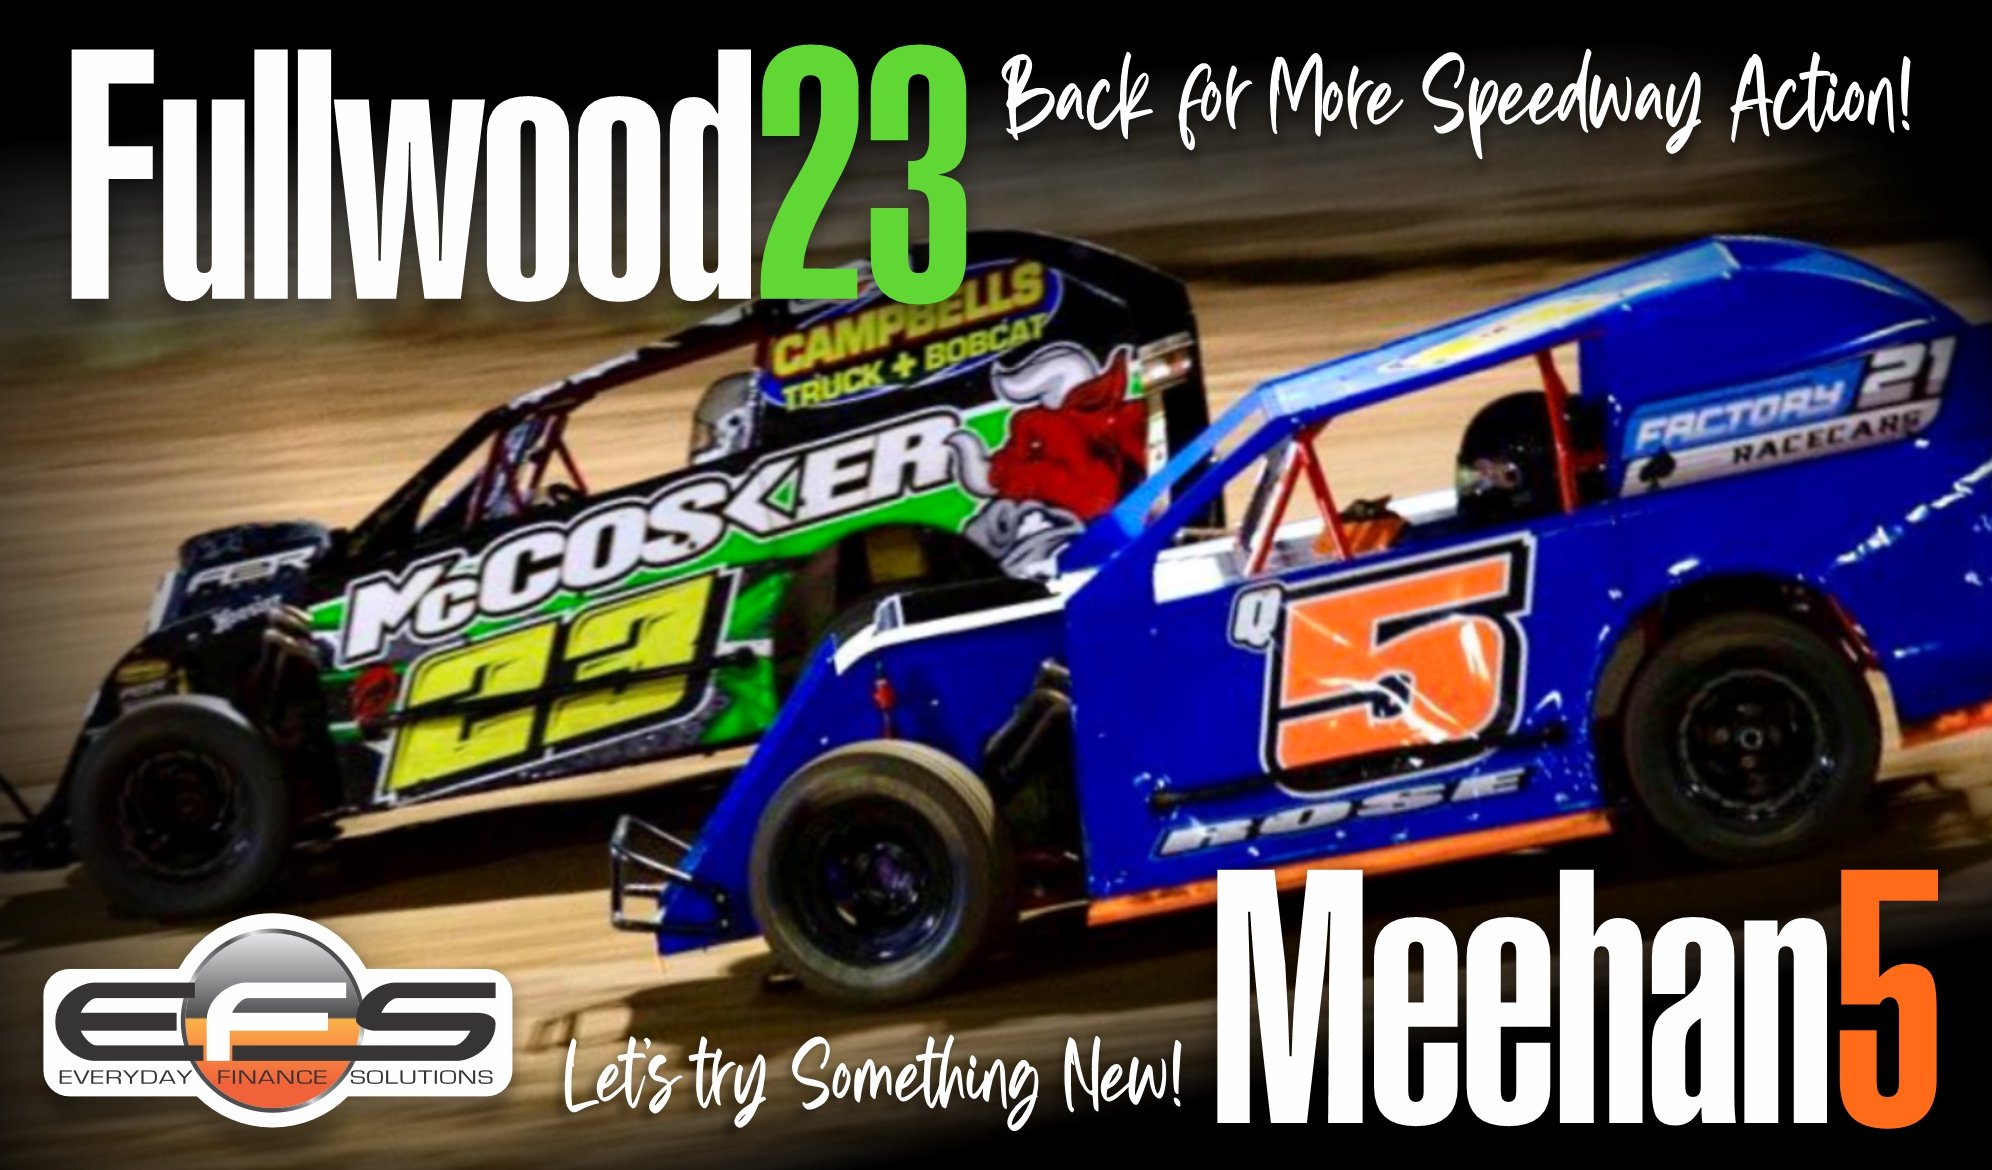 FULLWOOD &amp; MEEHAN ARE CHANGING IT UP AT TOOWOOMBA SPEEDWAY!
Tonight will see Bryce Fullwood  BJR team racer, switching gears from the V8 Supercar to get back behind the wheel of the McCosker Contracting / Campbells Truck &amp; Bobcat Q23 Modlite.